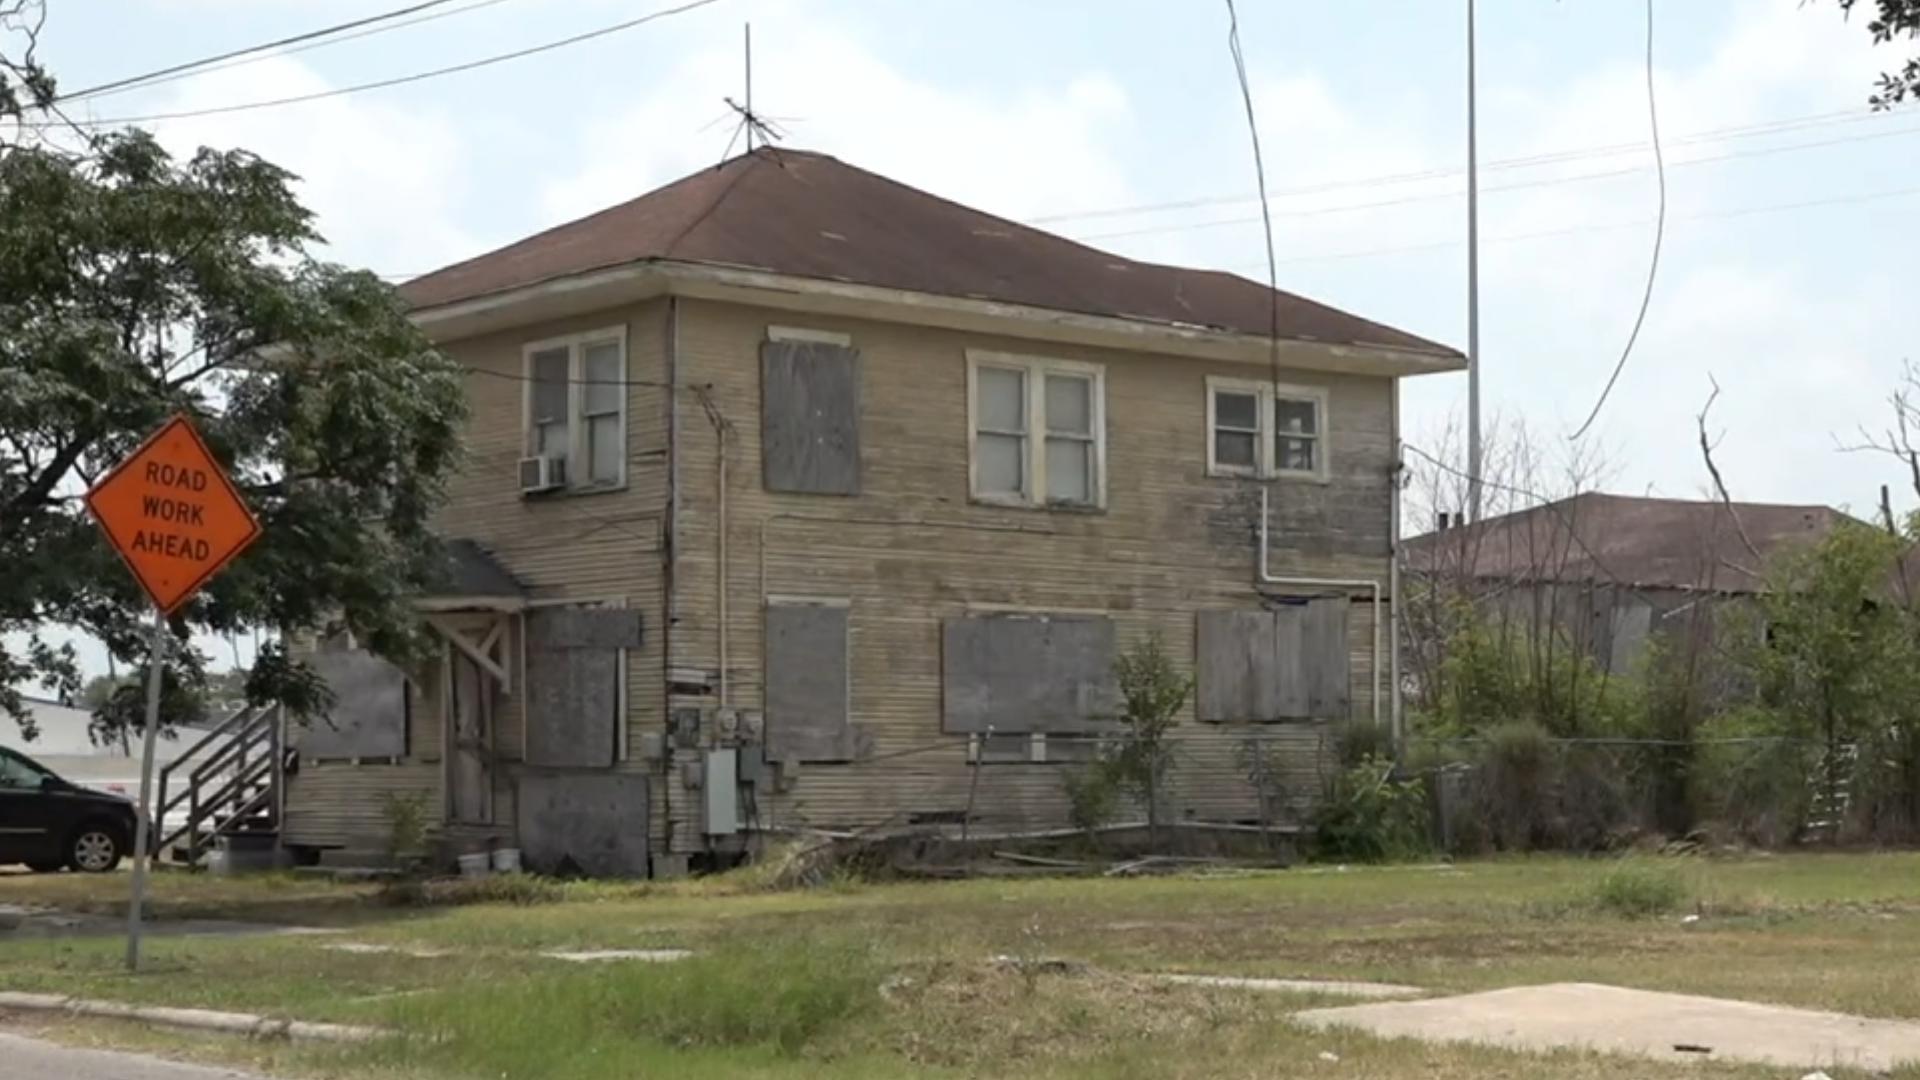 Officials say vacant or abandoned homes need to be addressed because it can bring down the property values of a neighborhood and can invite criminal activity.